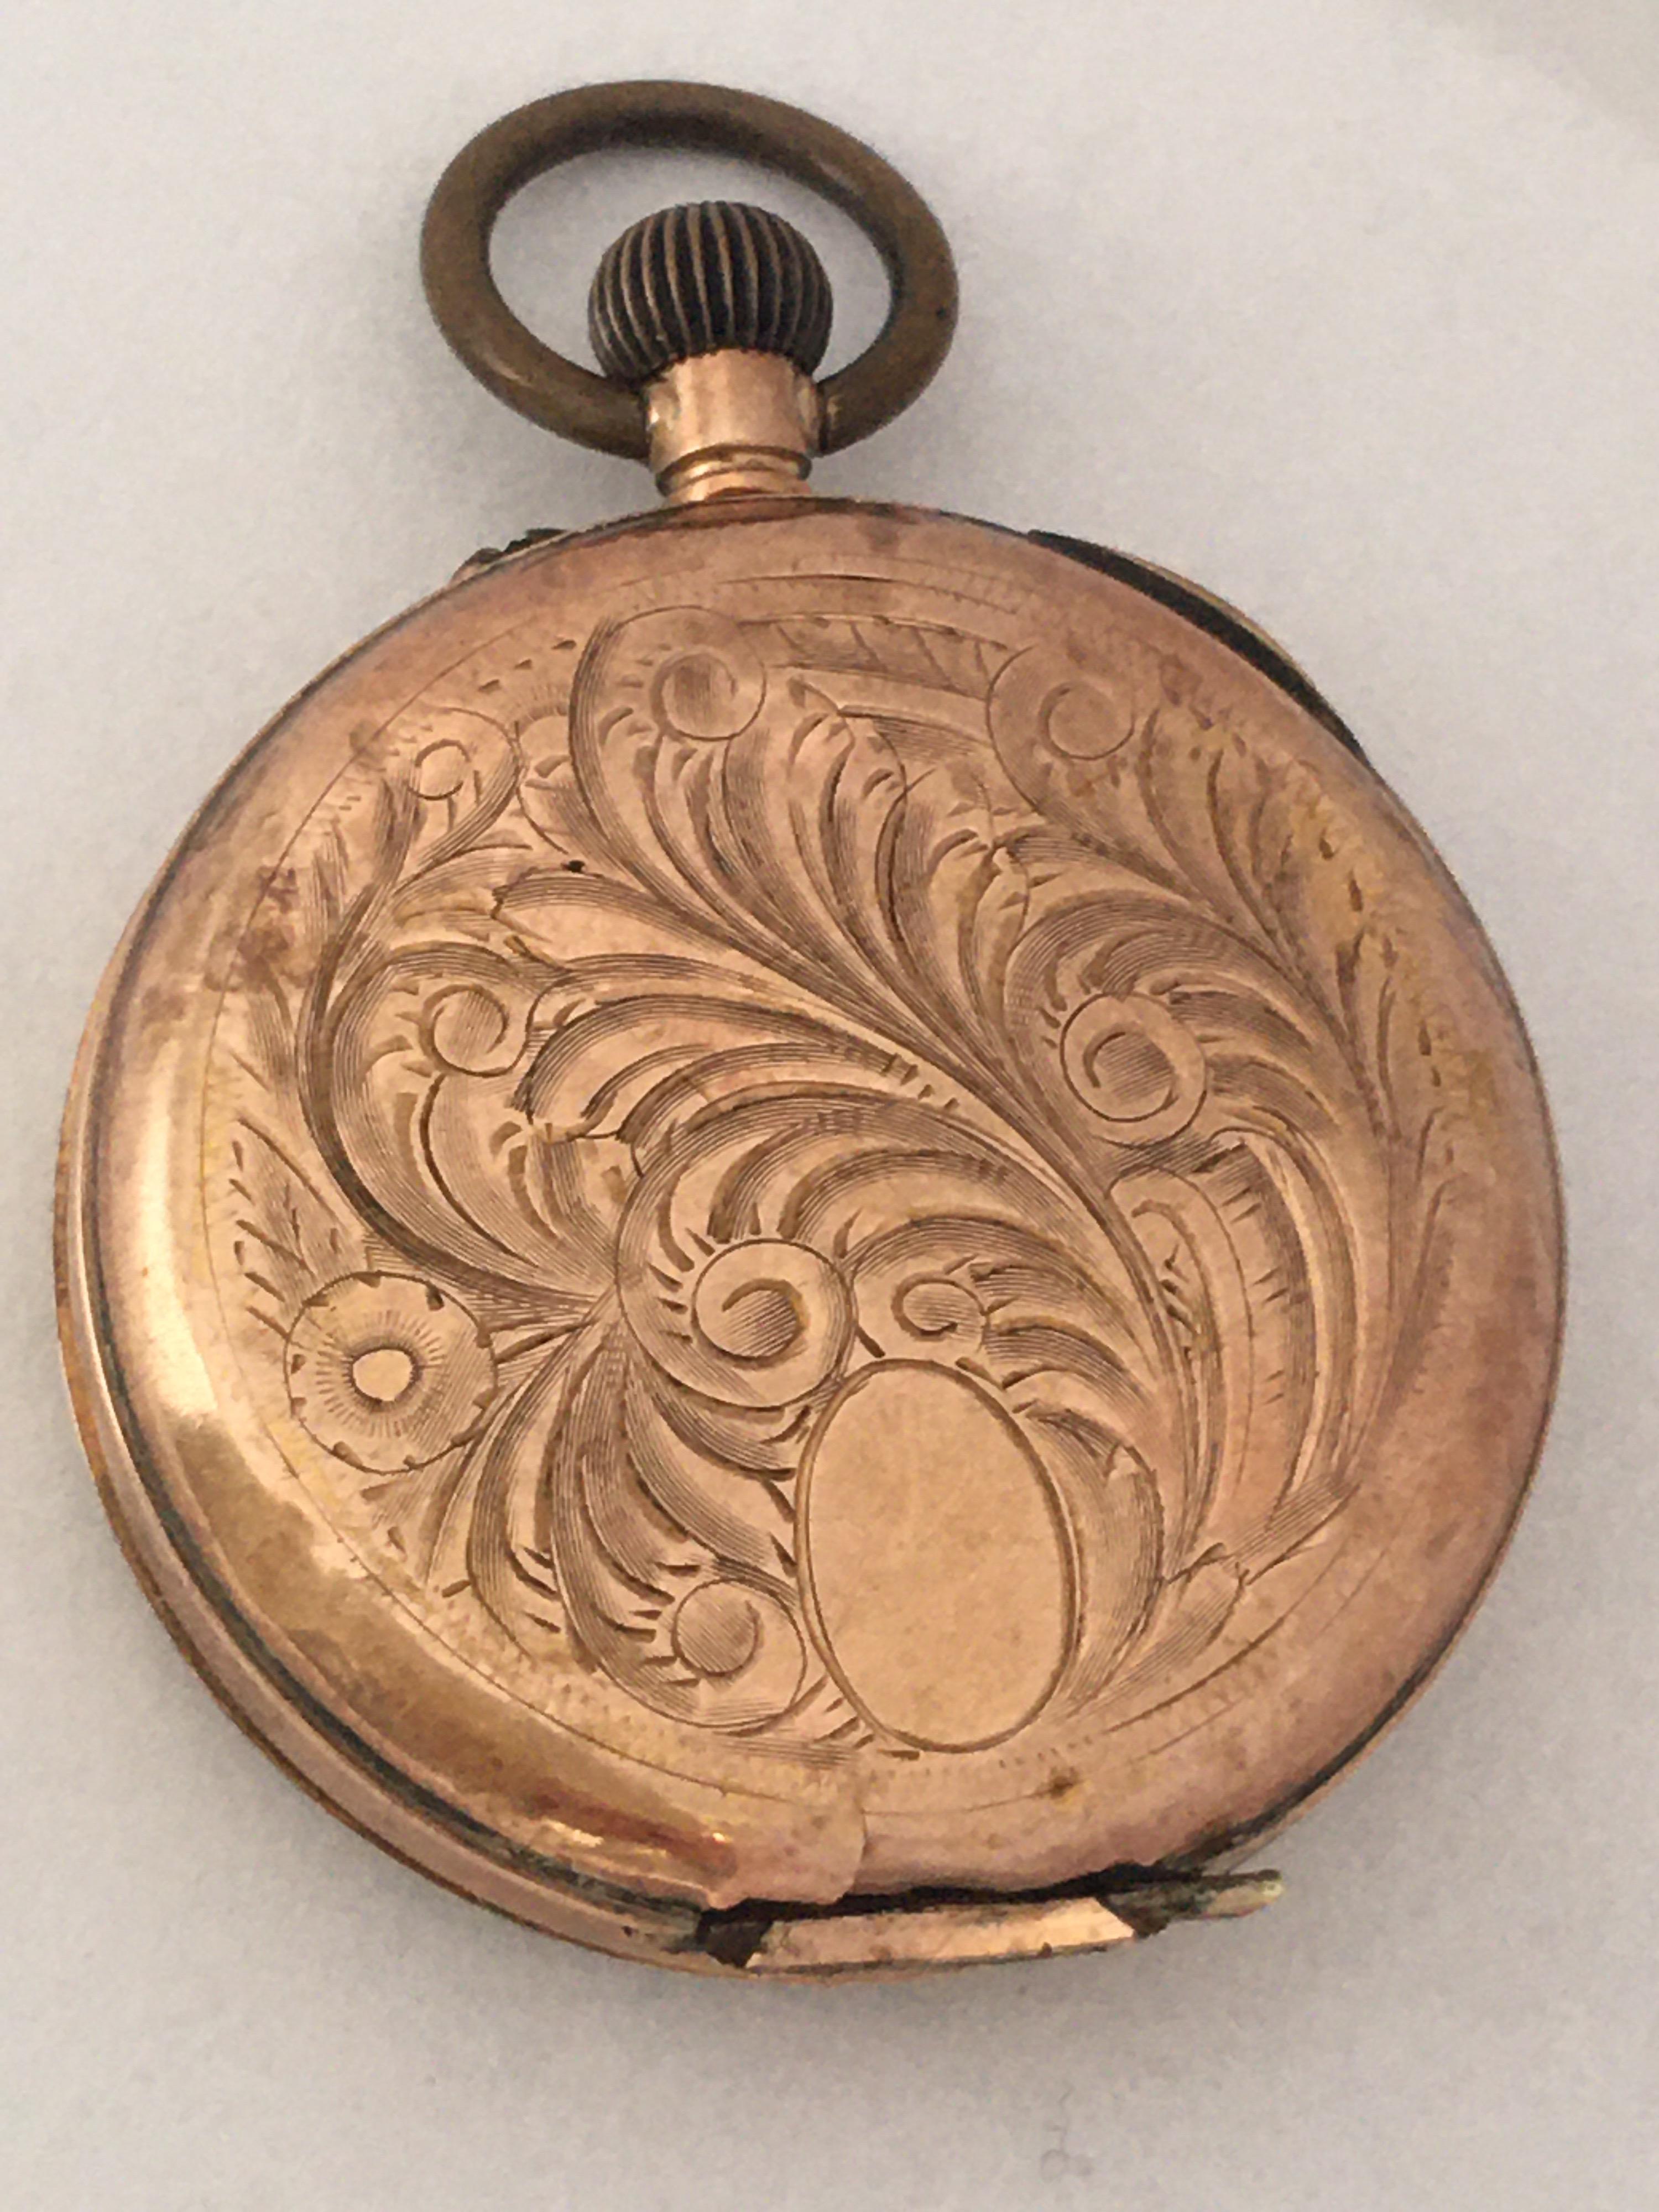 This beautiful 33mm diameter antique gold hand-winding ladies Fob watch is working but it keep stopping. Visible signs of ageing and wear with light tiny dents and scratches on the gold watch case. The hinges on the back cover case is broken as